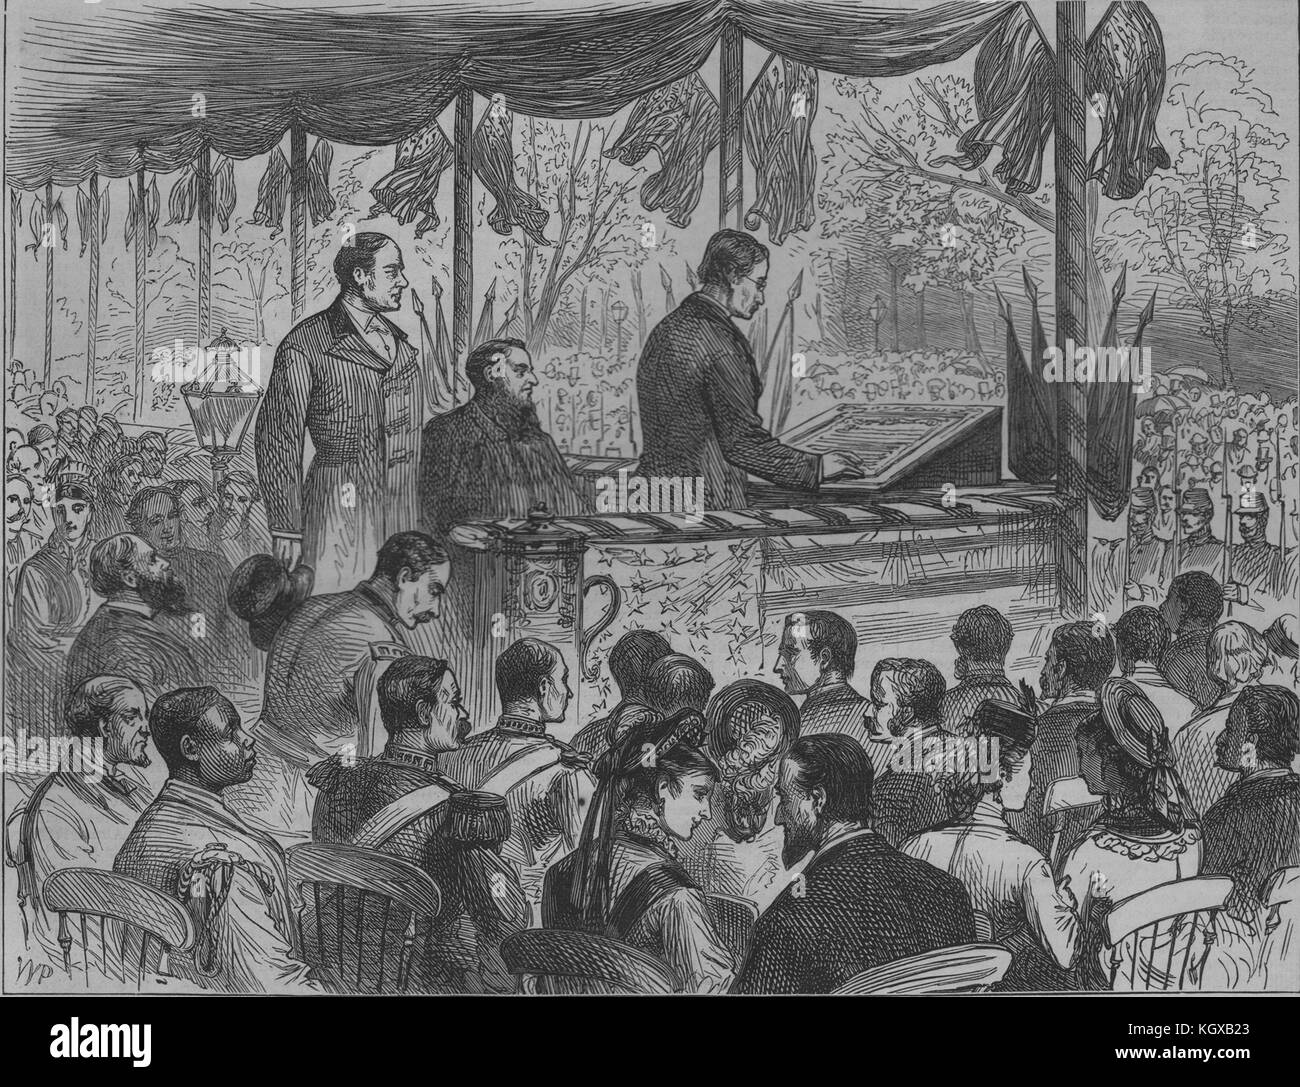 July 4th in Philadelphia Richard Lee reading Declaration of Independence 1876. The Illustrated London News Stock Photo